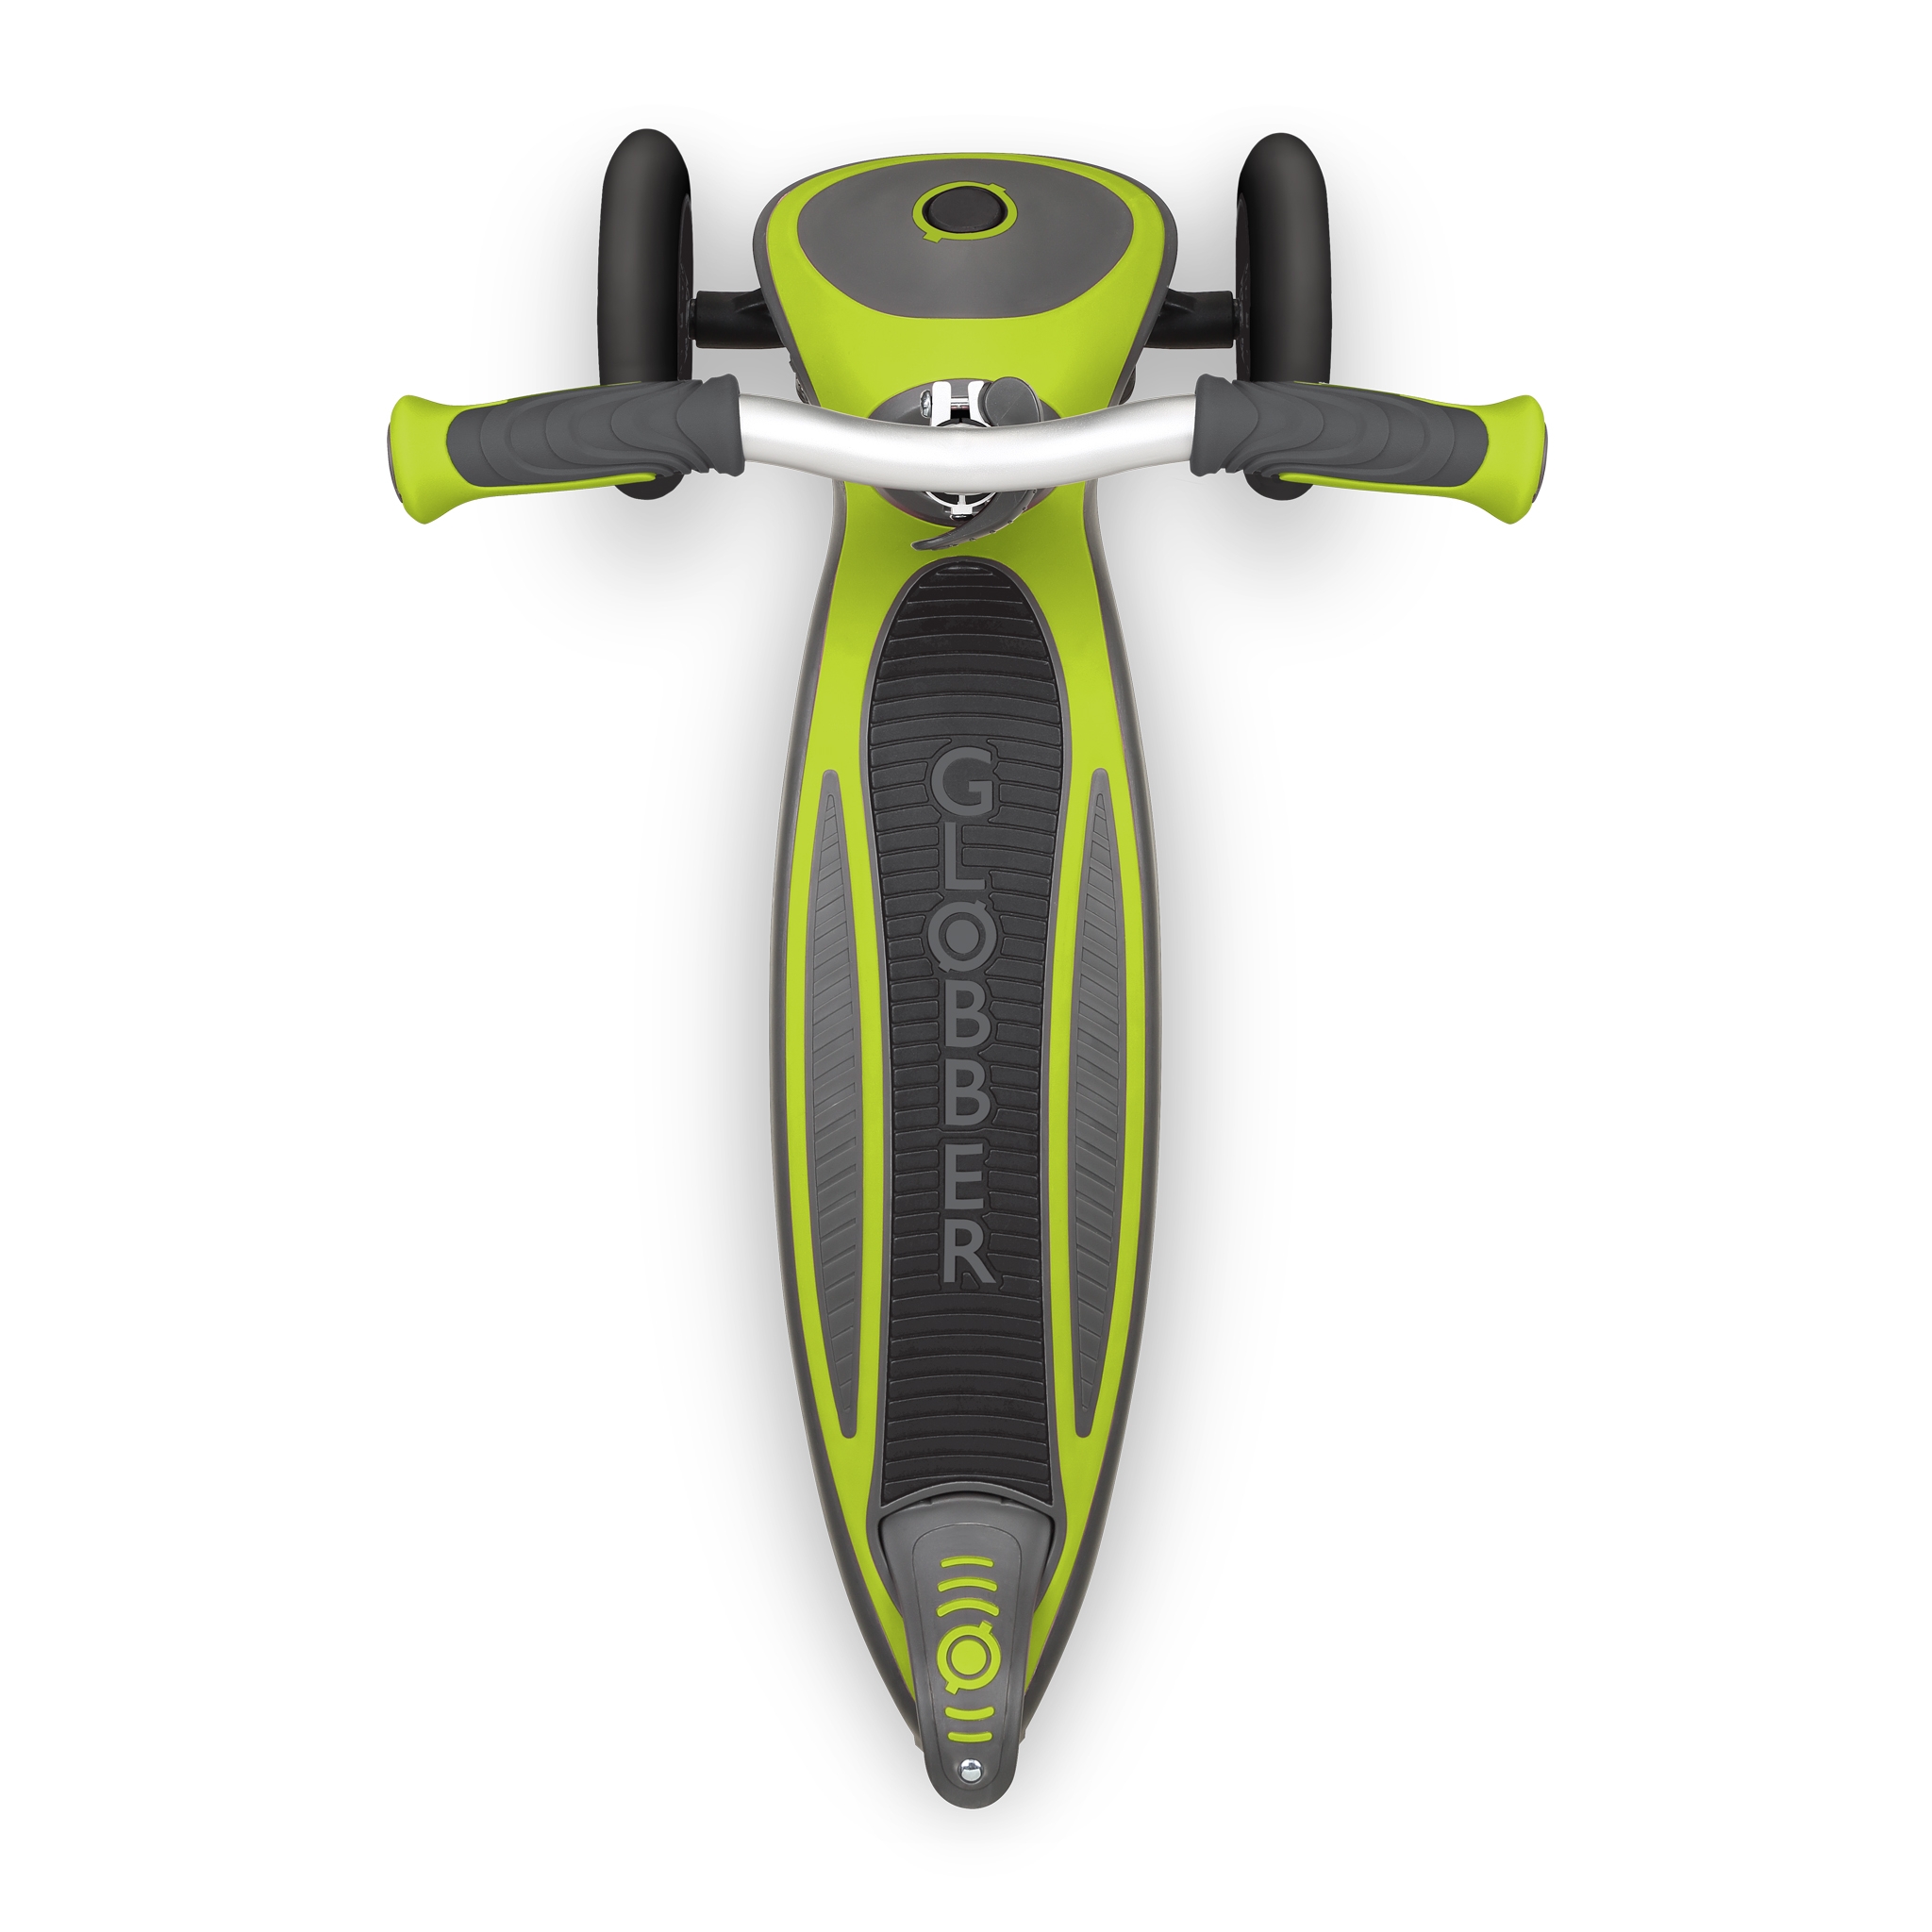 Globber-MASTER-3-wheel-foldable-scooter-for-kids-with-extra-wide-anti-slip-deck-for-comfortable-rides_green 0